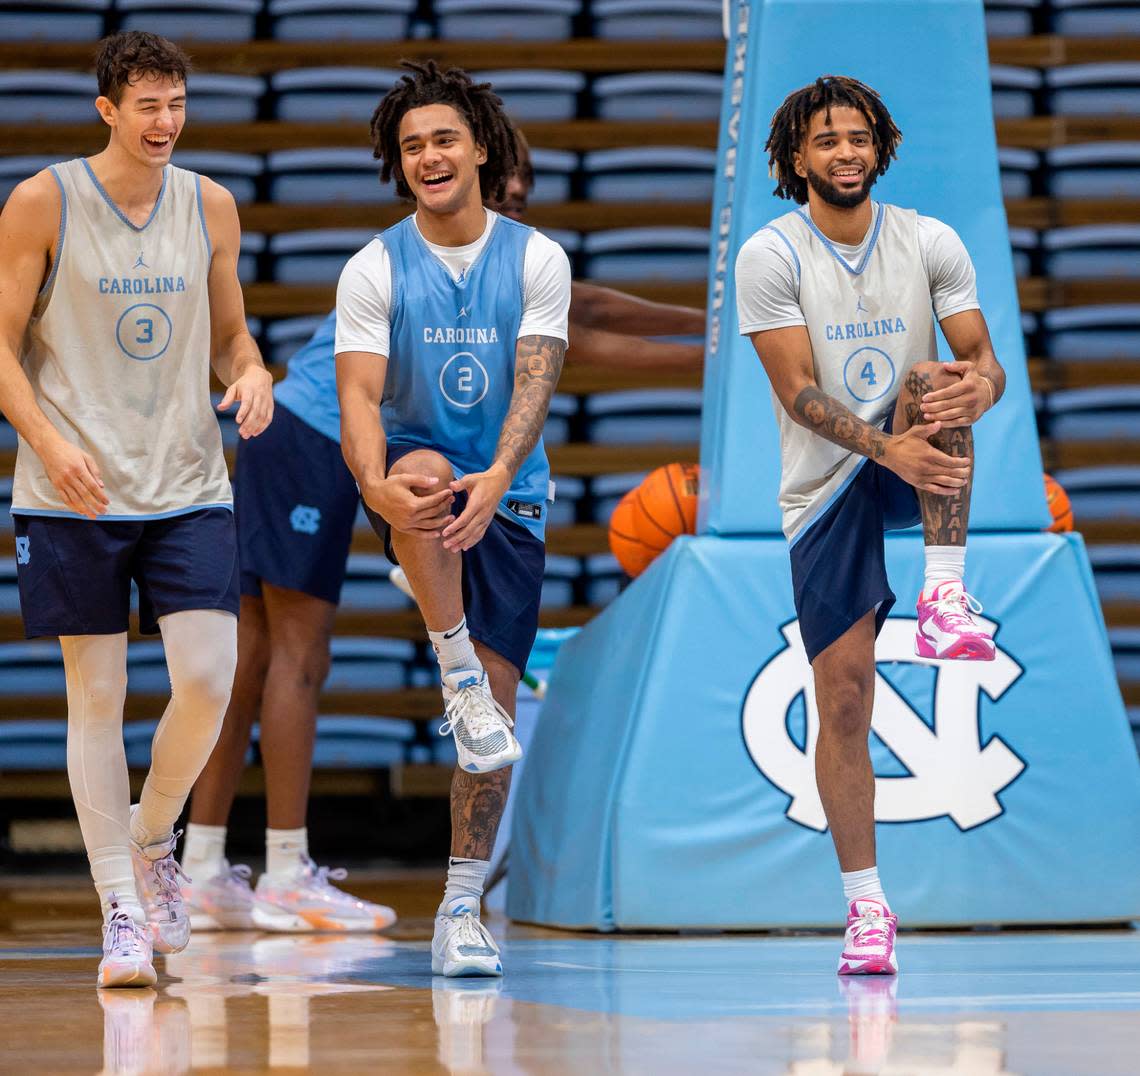 North Carolina’s Cormac Ryan (3) Elliott Cadeau (2) and R.J. Davis (4) stretch during the Tar Heels’ practice on Friday, October 6, 2023 at the Dean Smith Center in Chapel Hill, N.C.